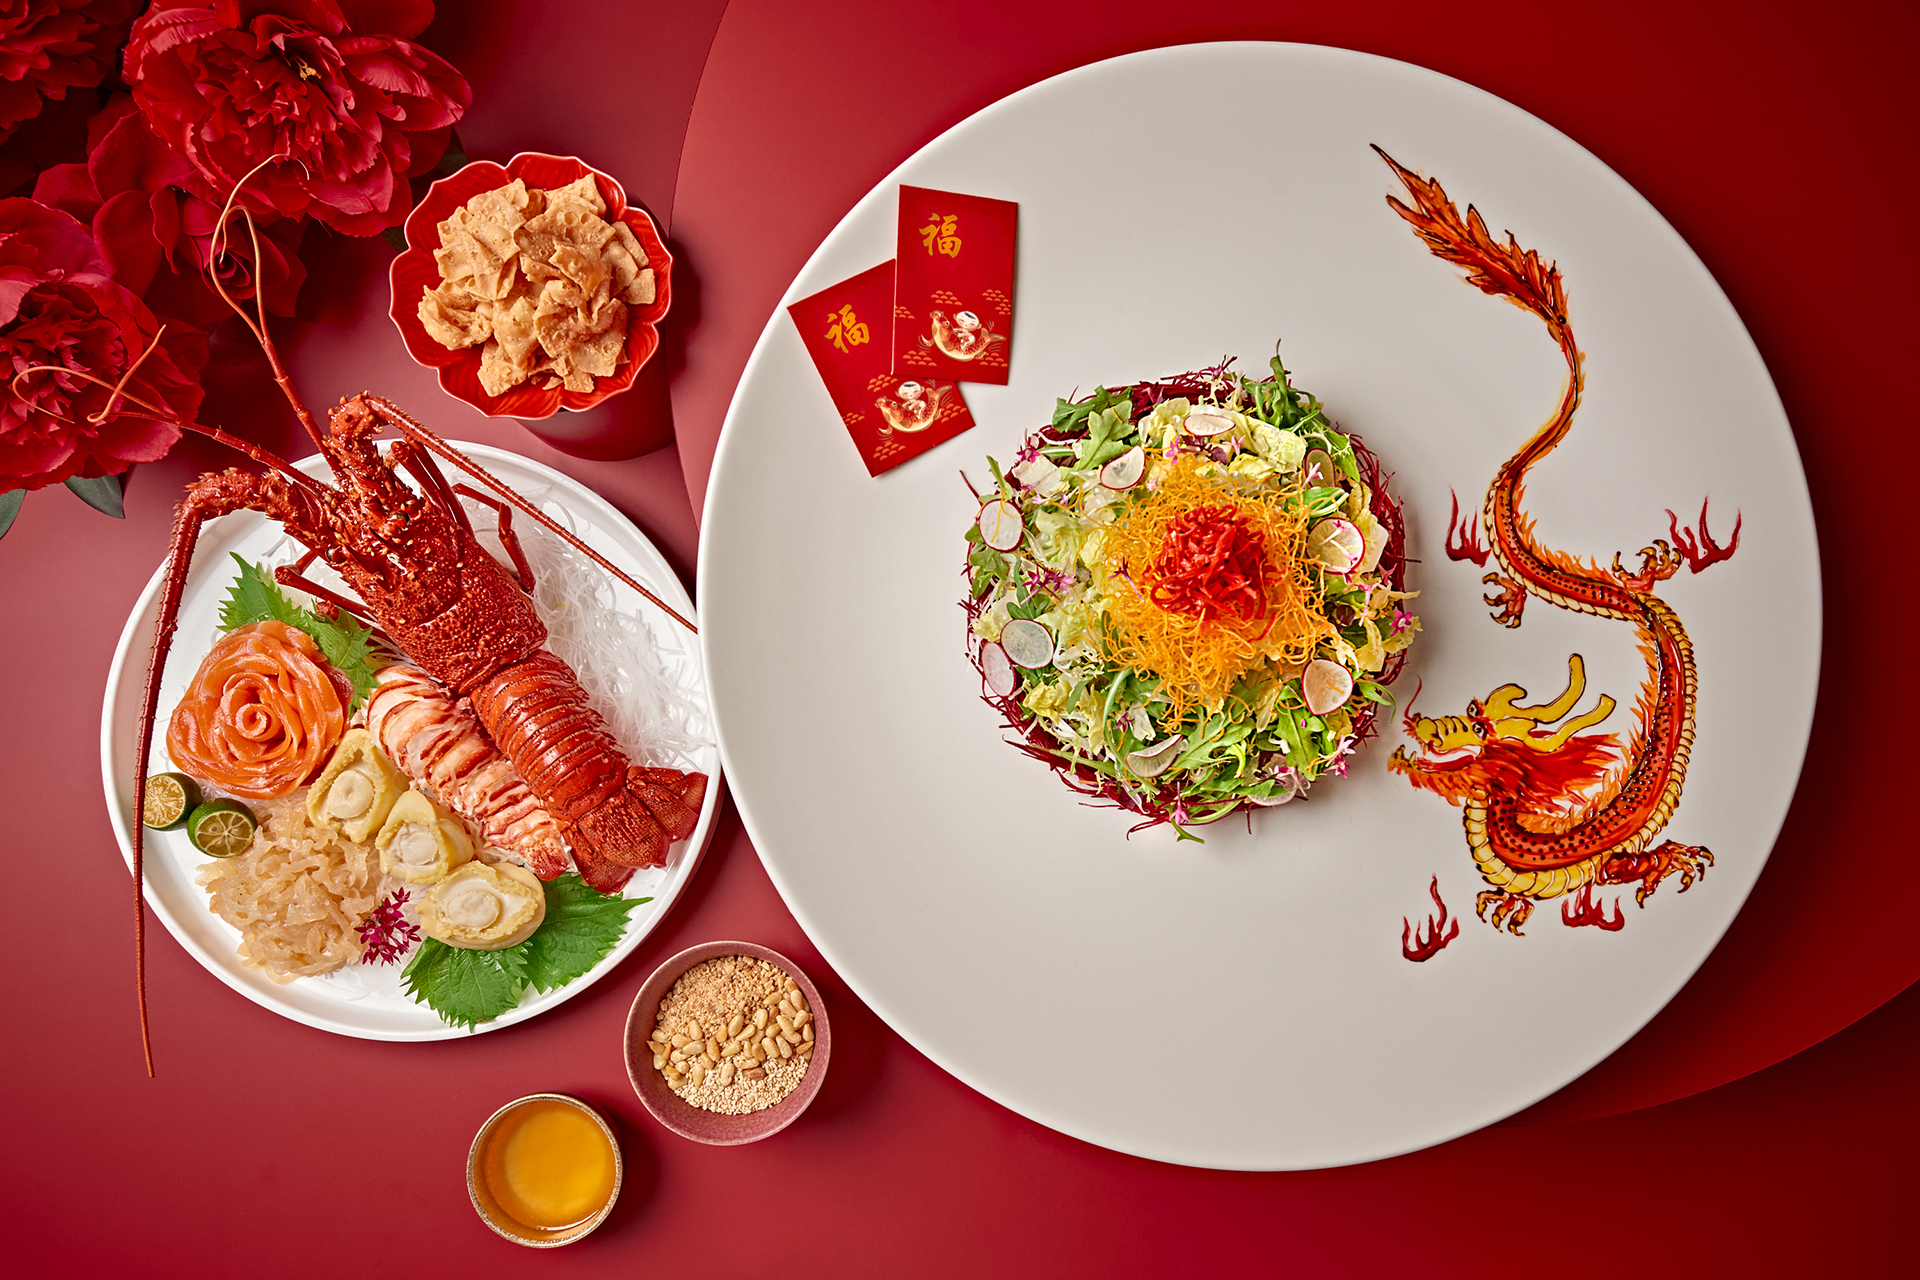 Lunar New Year Treasures from Min Jiang at the Hotel & The Deli